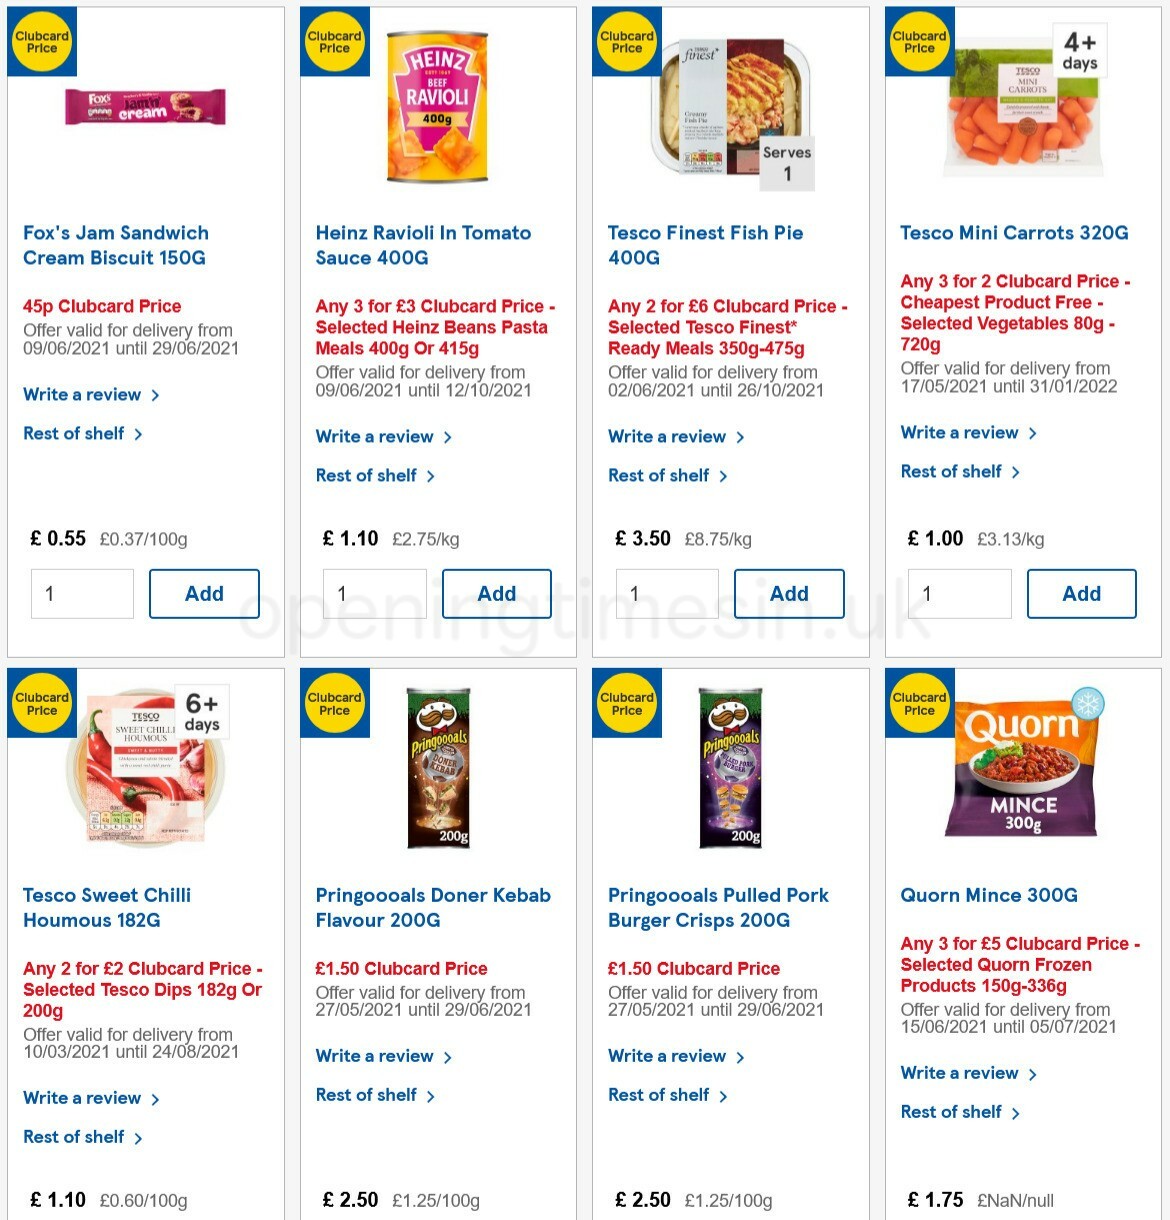 TESCO Offers from 16 June